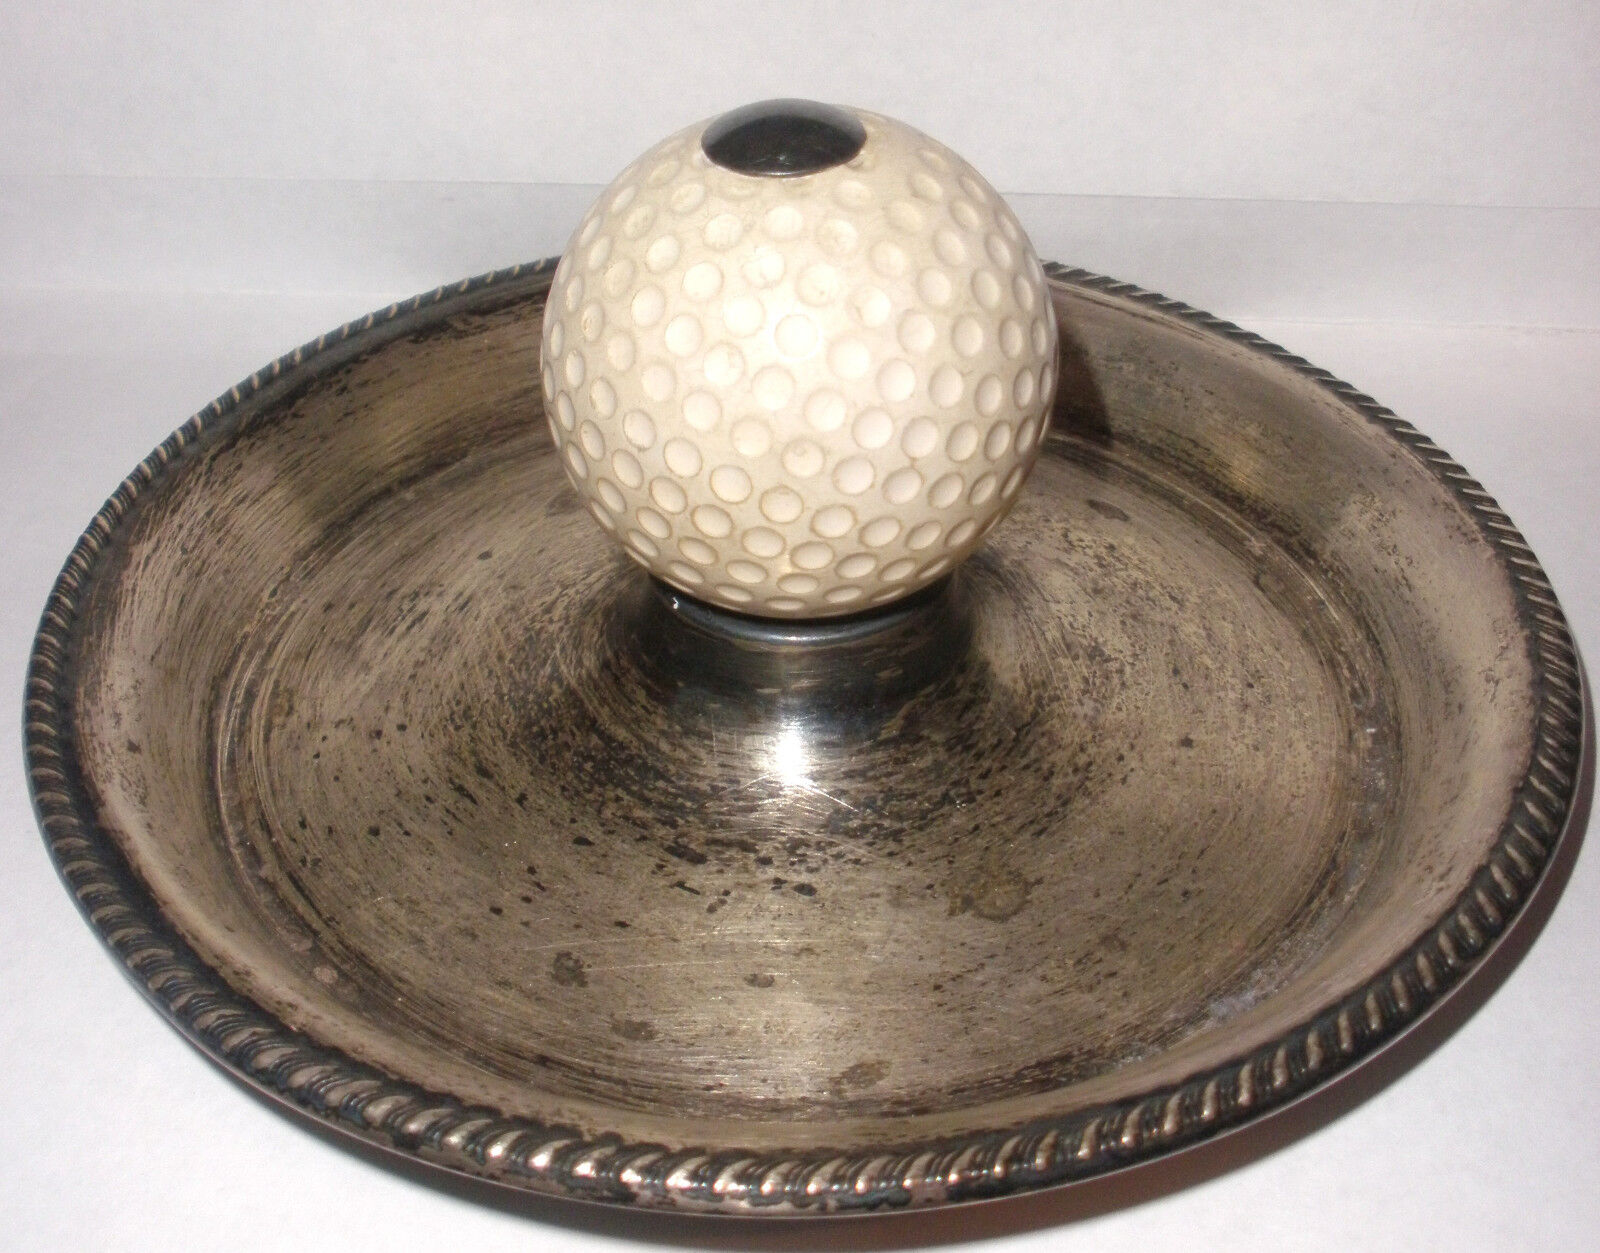 VINTAGE FRANK WHITING STERLING SILVER GOLF BALL KEY COIN CHANGE TRAY ASHTRAY 